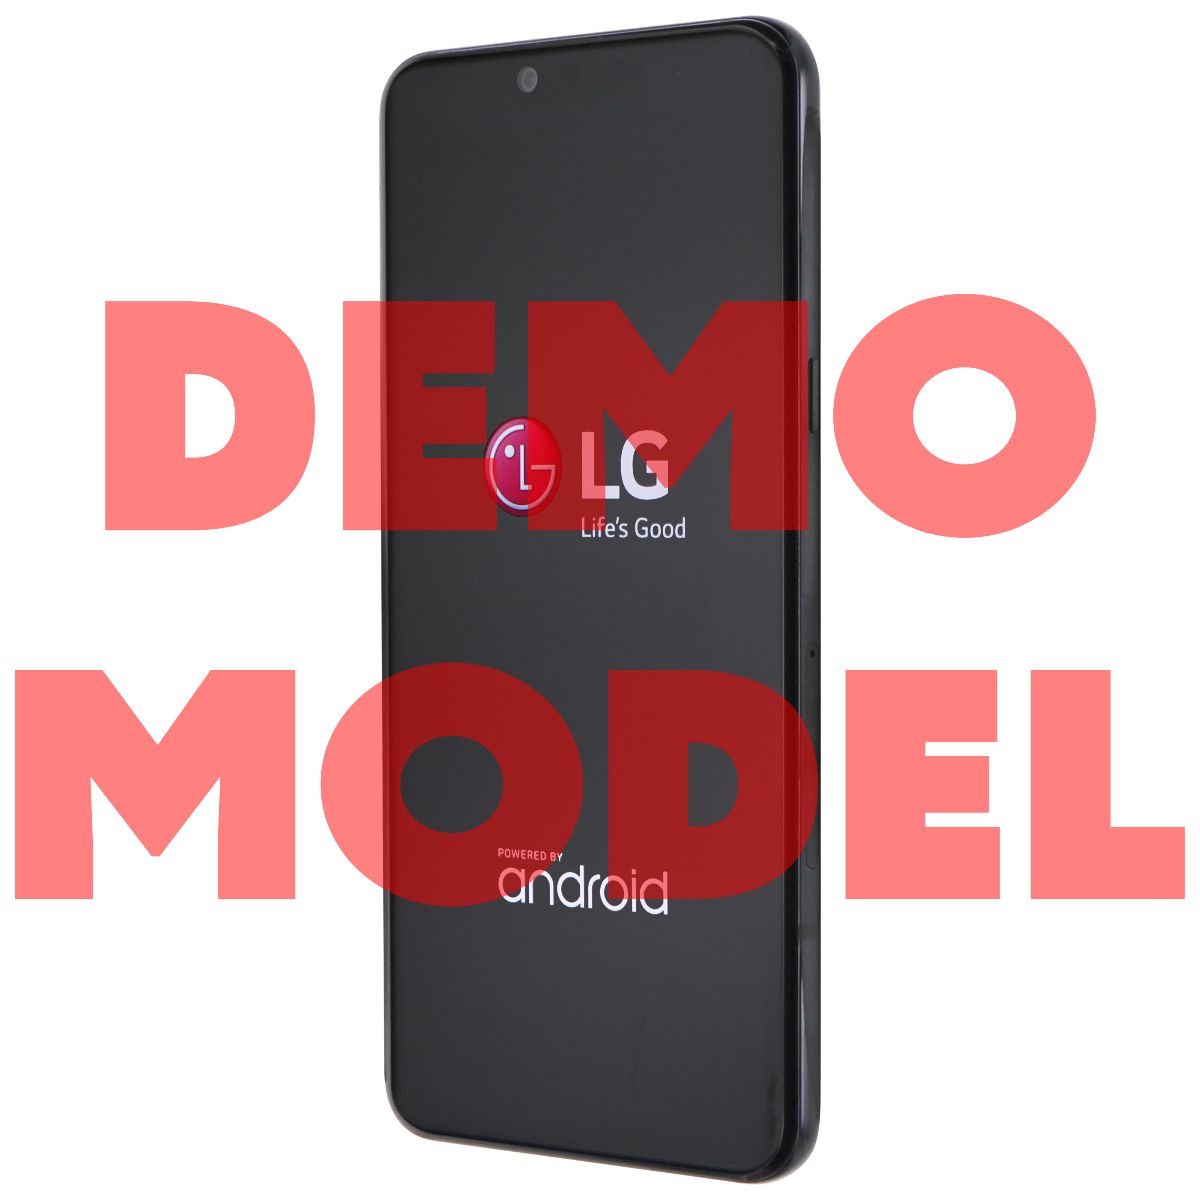 DEMO MODEL - LG G8 ThinQ (6.1-inch) Smartphone (LM-G820V) 128GB / Black Cell Phones & Smartphones LG    - Simple Cell Bulk Wholesale Pricing - USA Seller